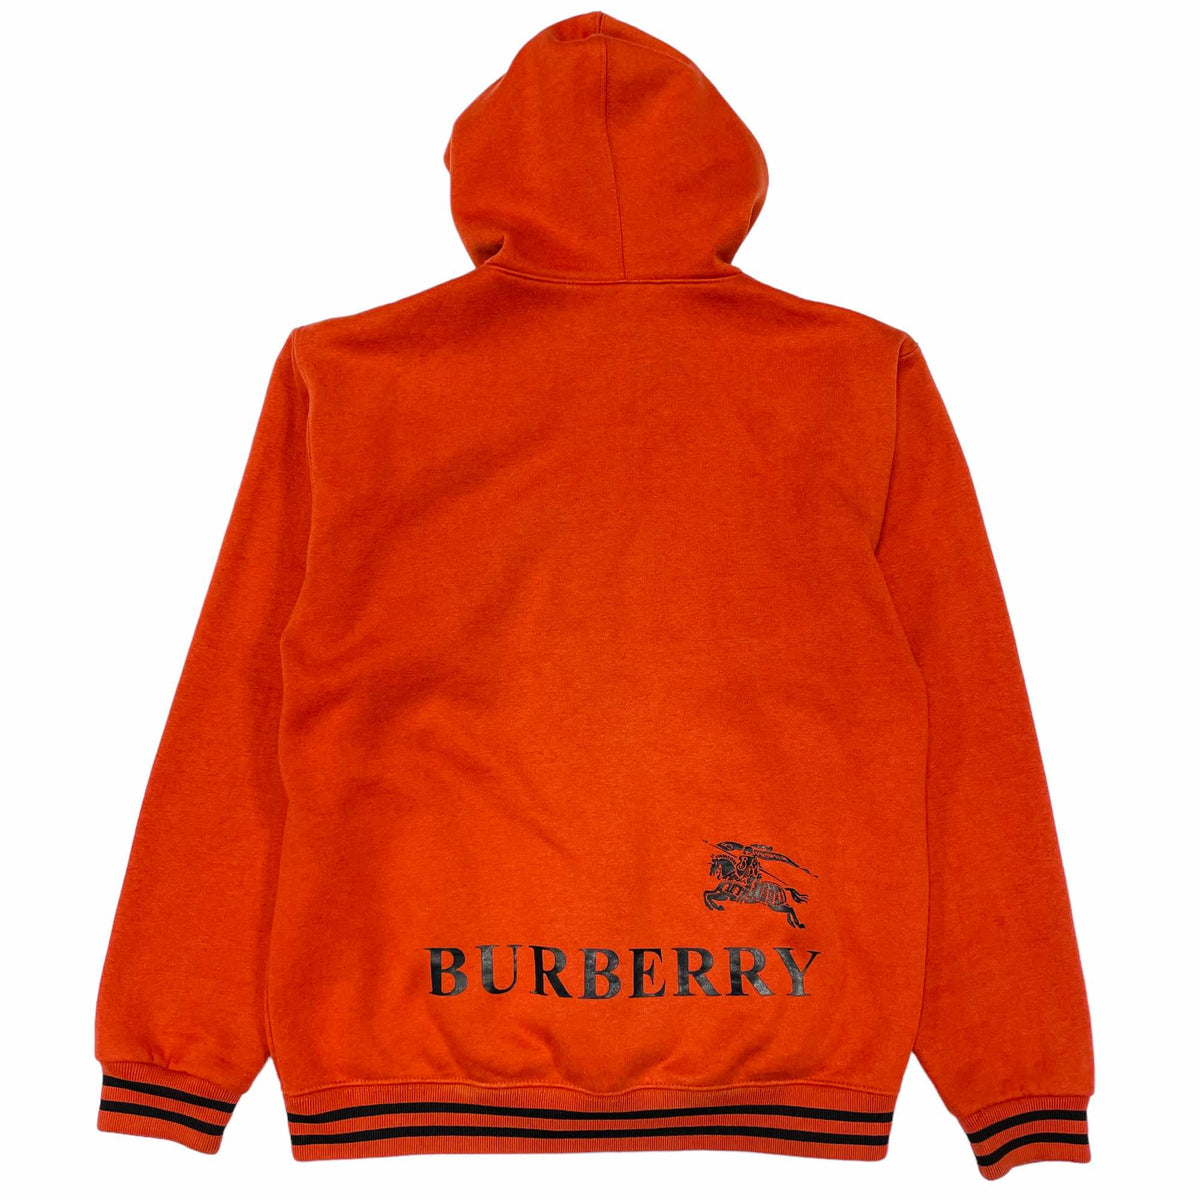 Burberry Hoodie - Large – The Vintage Store